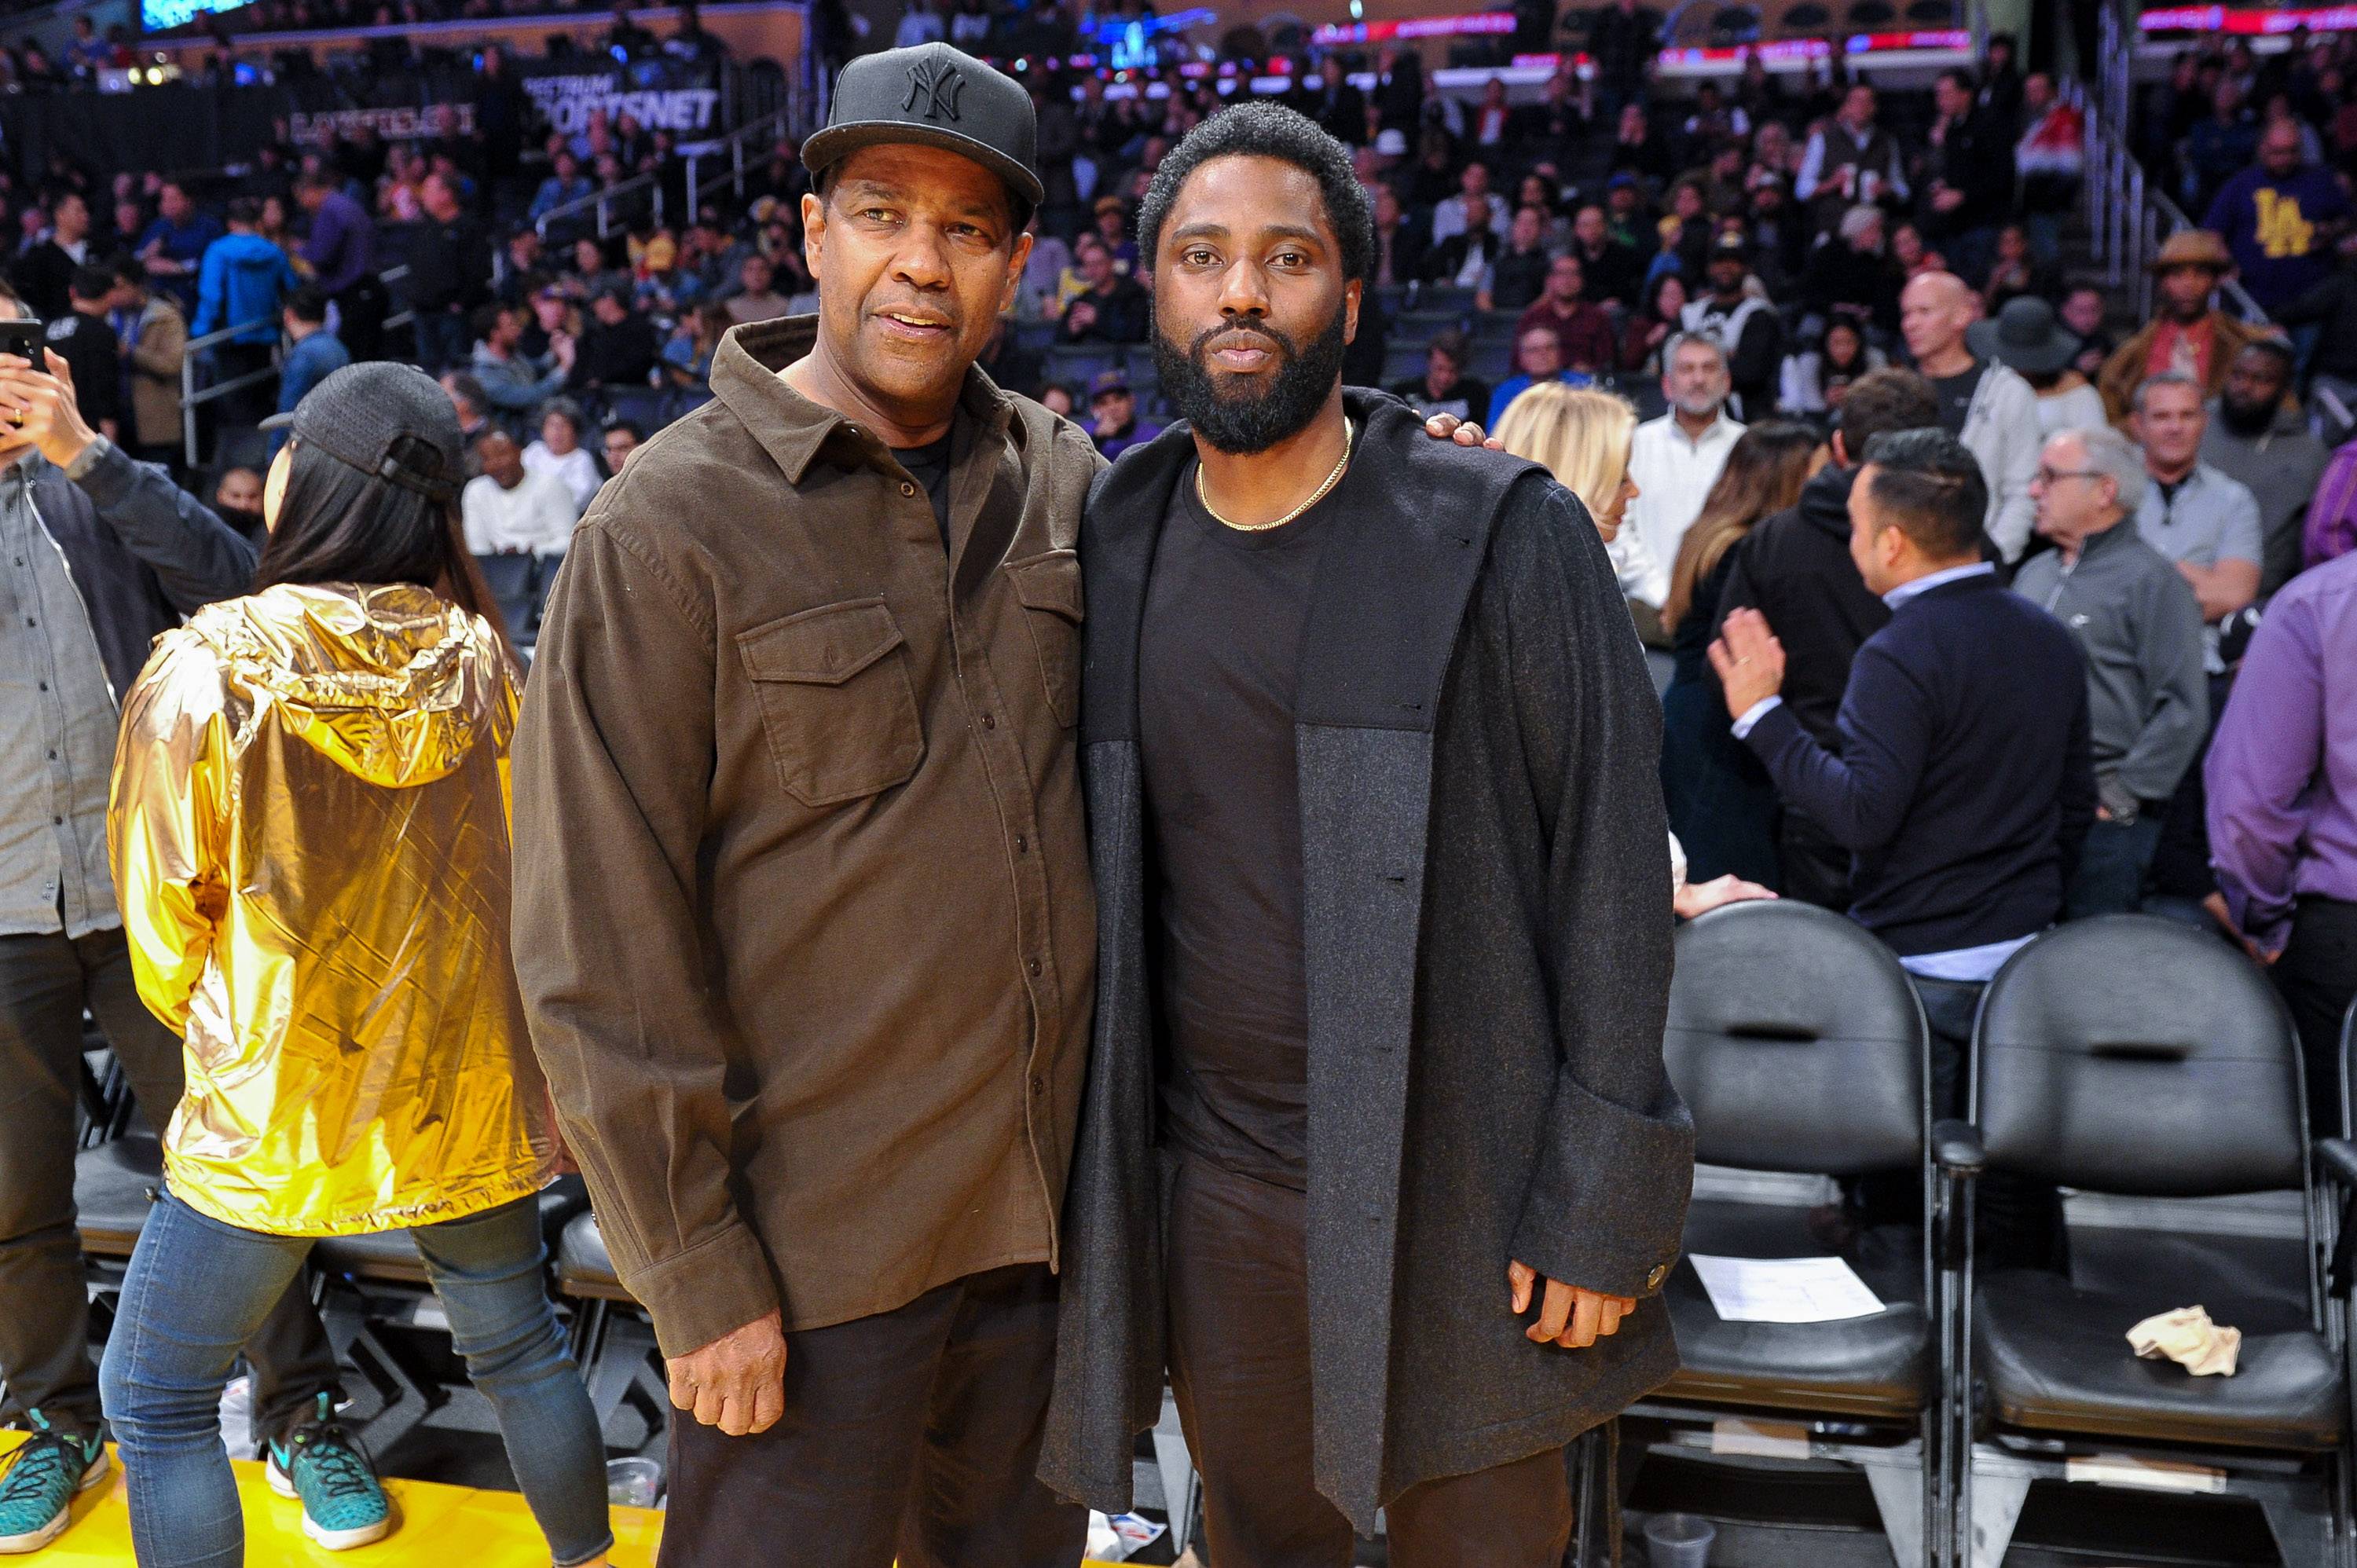 LOS ANGELES, CALIFORNIA - DECEMBER 05: Actors Denzel Washington and son John David Washington attend a basketball game between the Los Angeles Lakers and the San Antonio Spurs at Staples Center on December 05, 2018 in Los Angeles, California. (Photo by Allen Berezovsky/Getty Images)